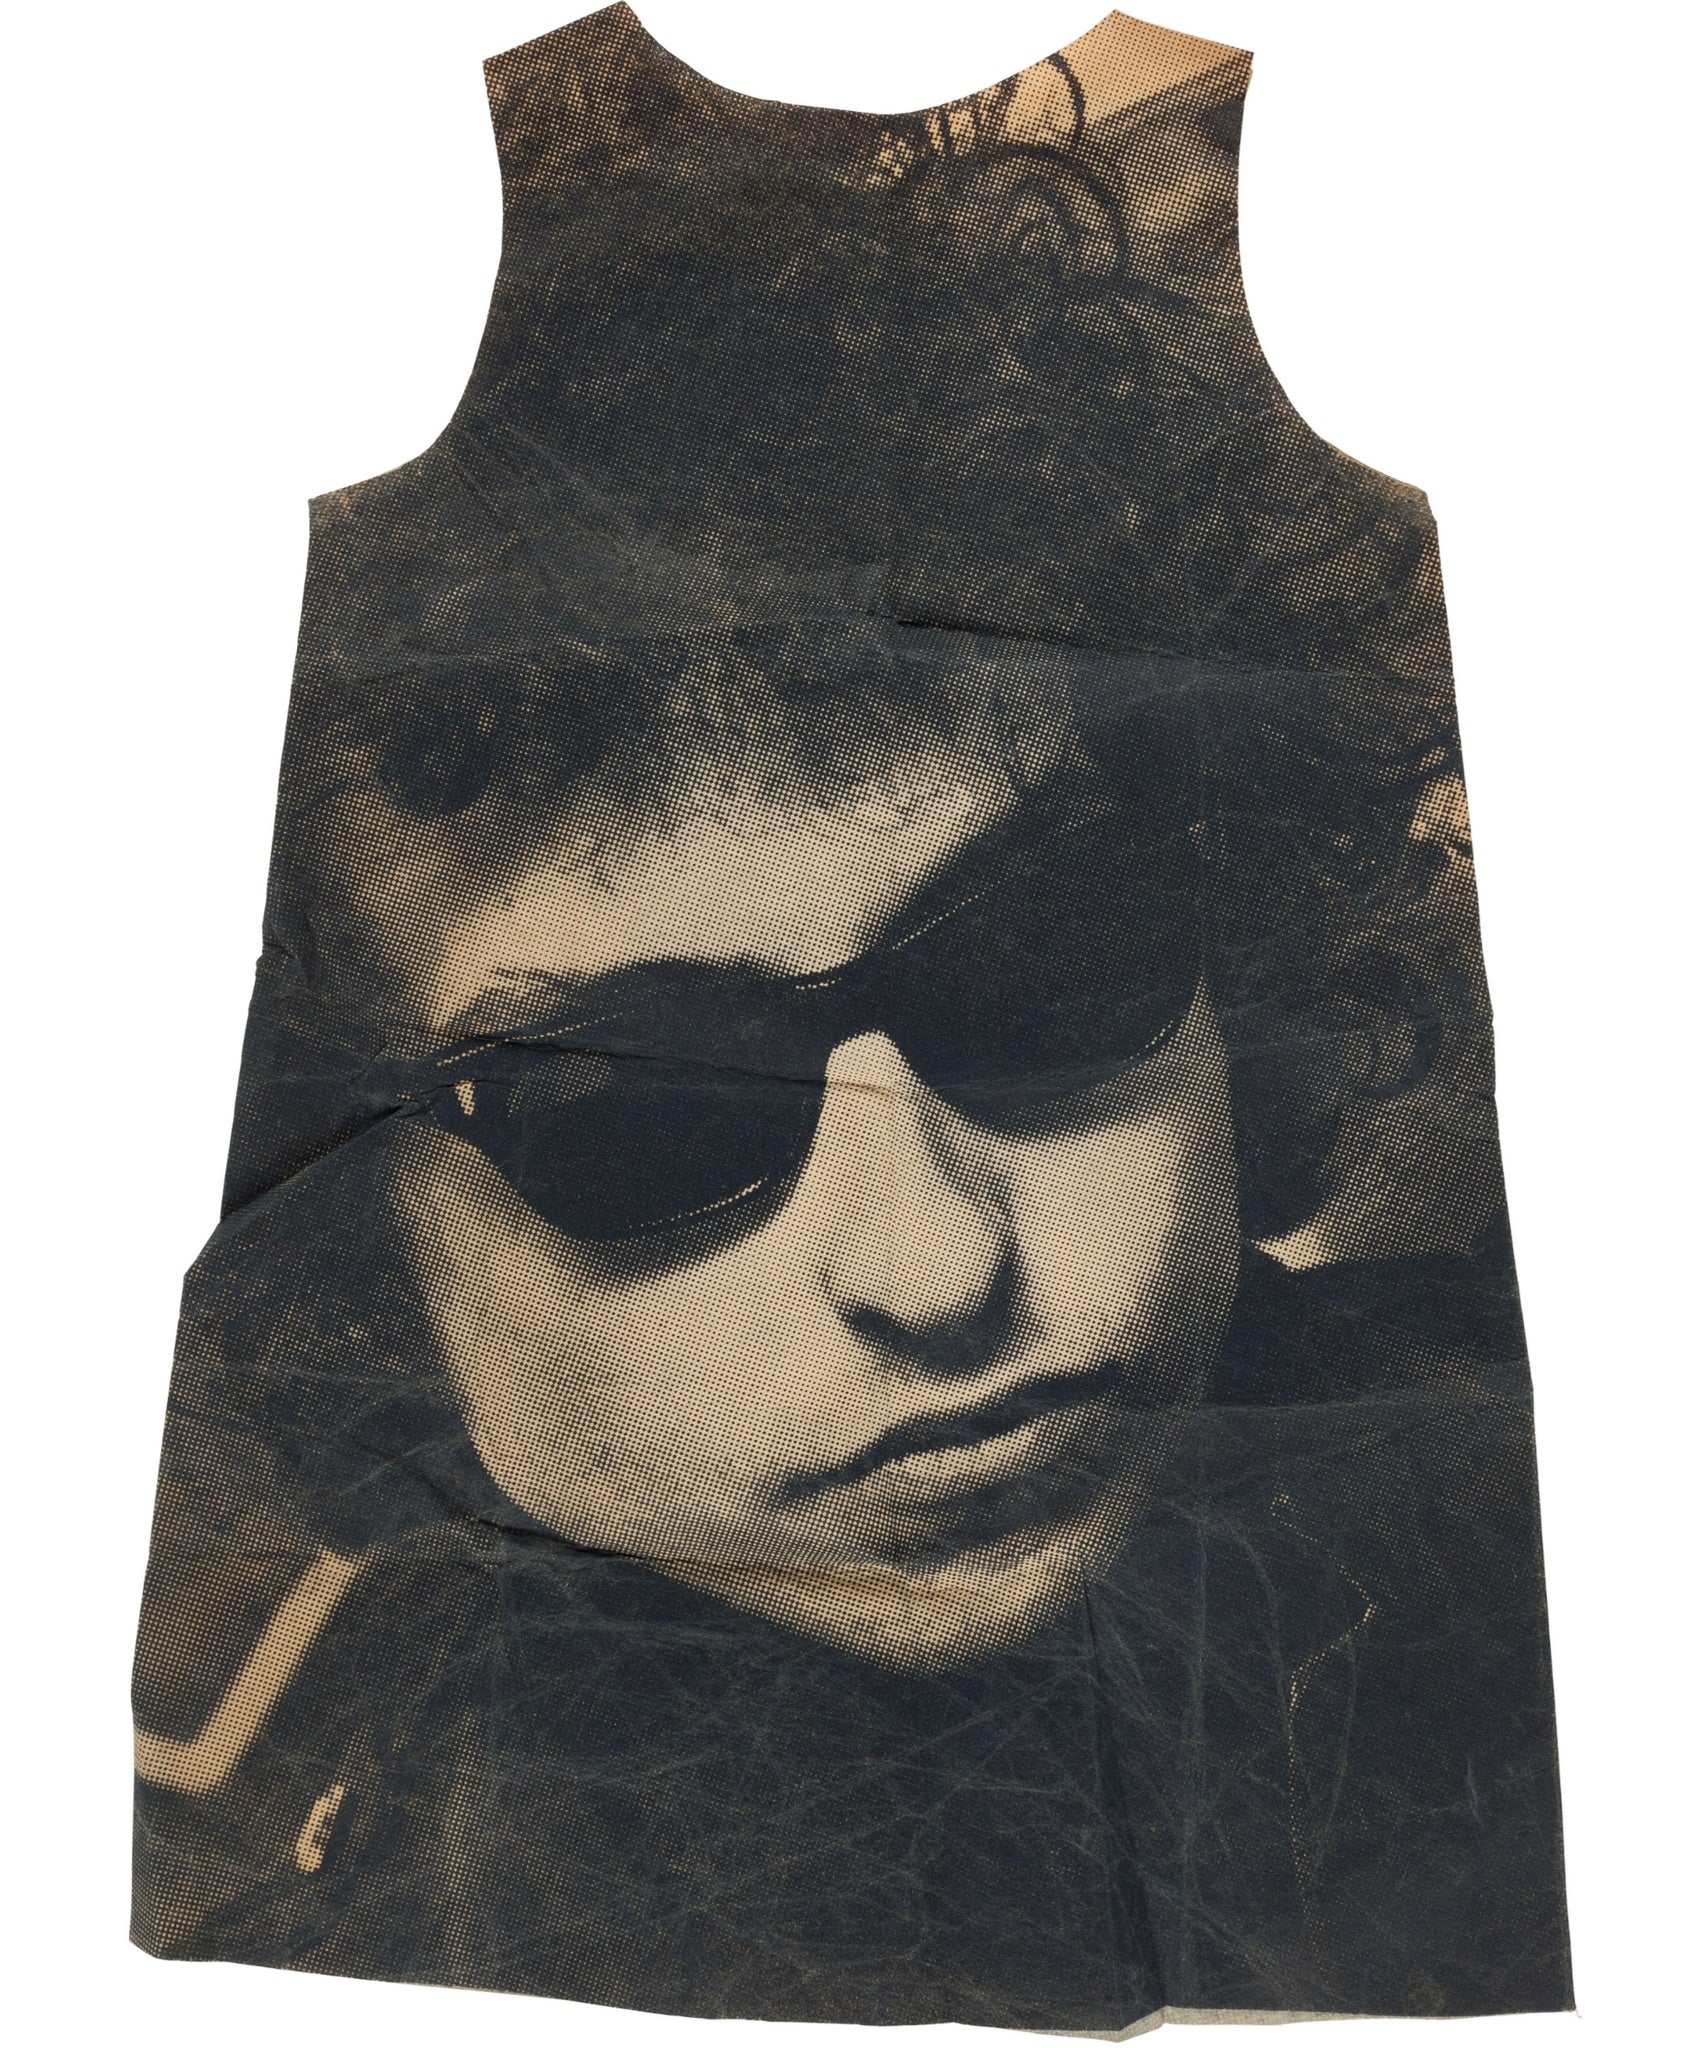 Dylan, Bob. (b. 1941) Paper Dress - Likely manufactured in the United Kingdom by Scott Paper Company in 1966